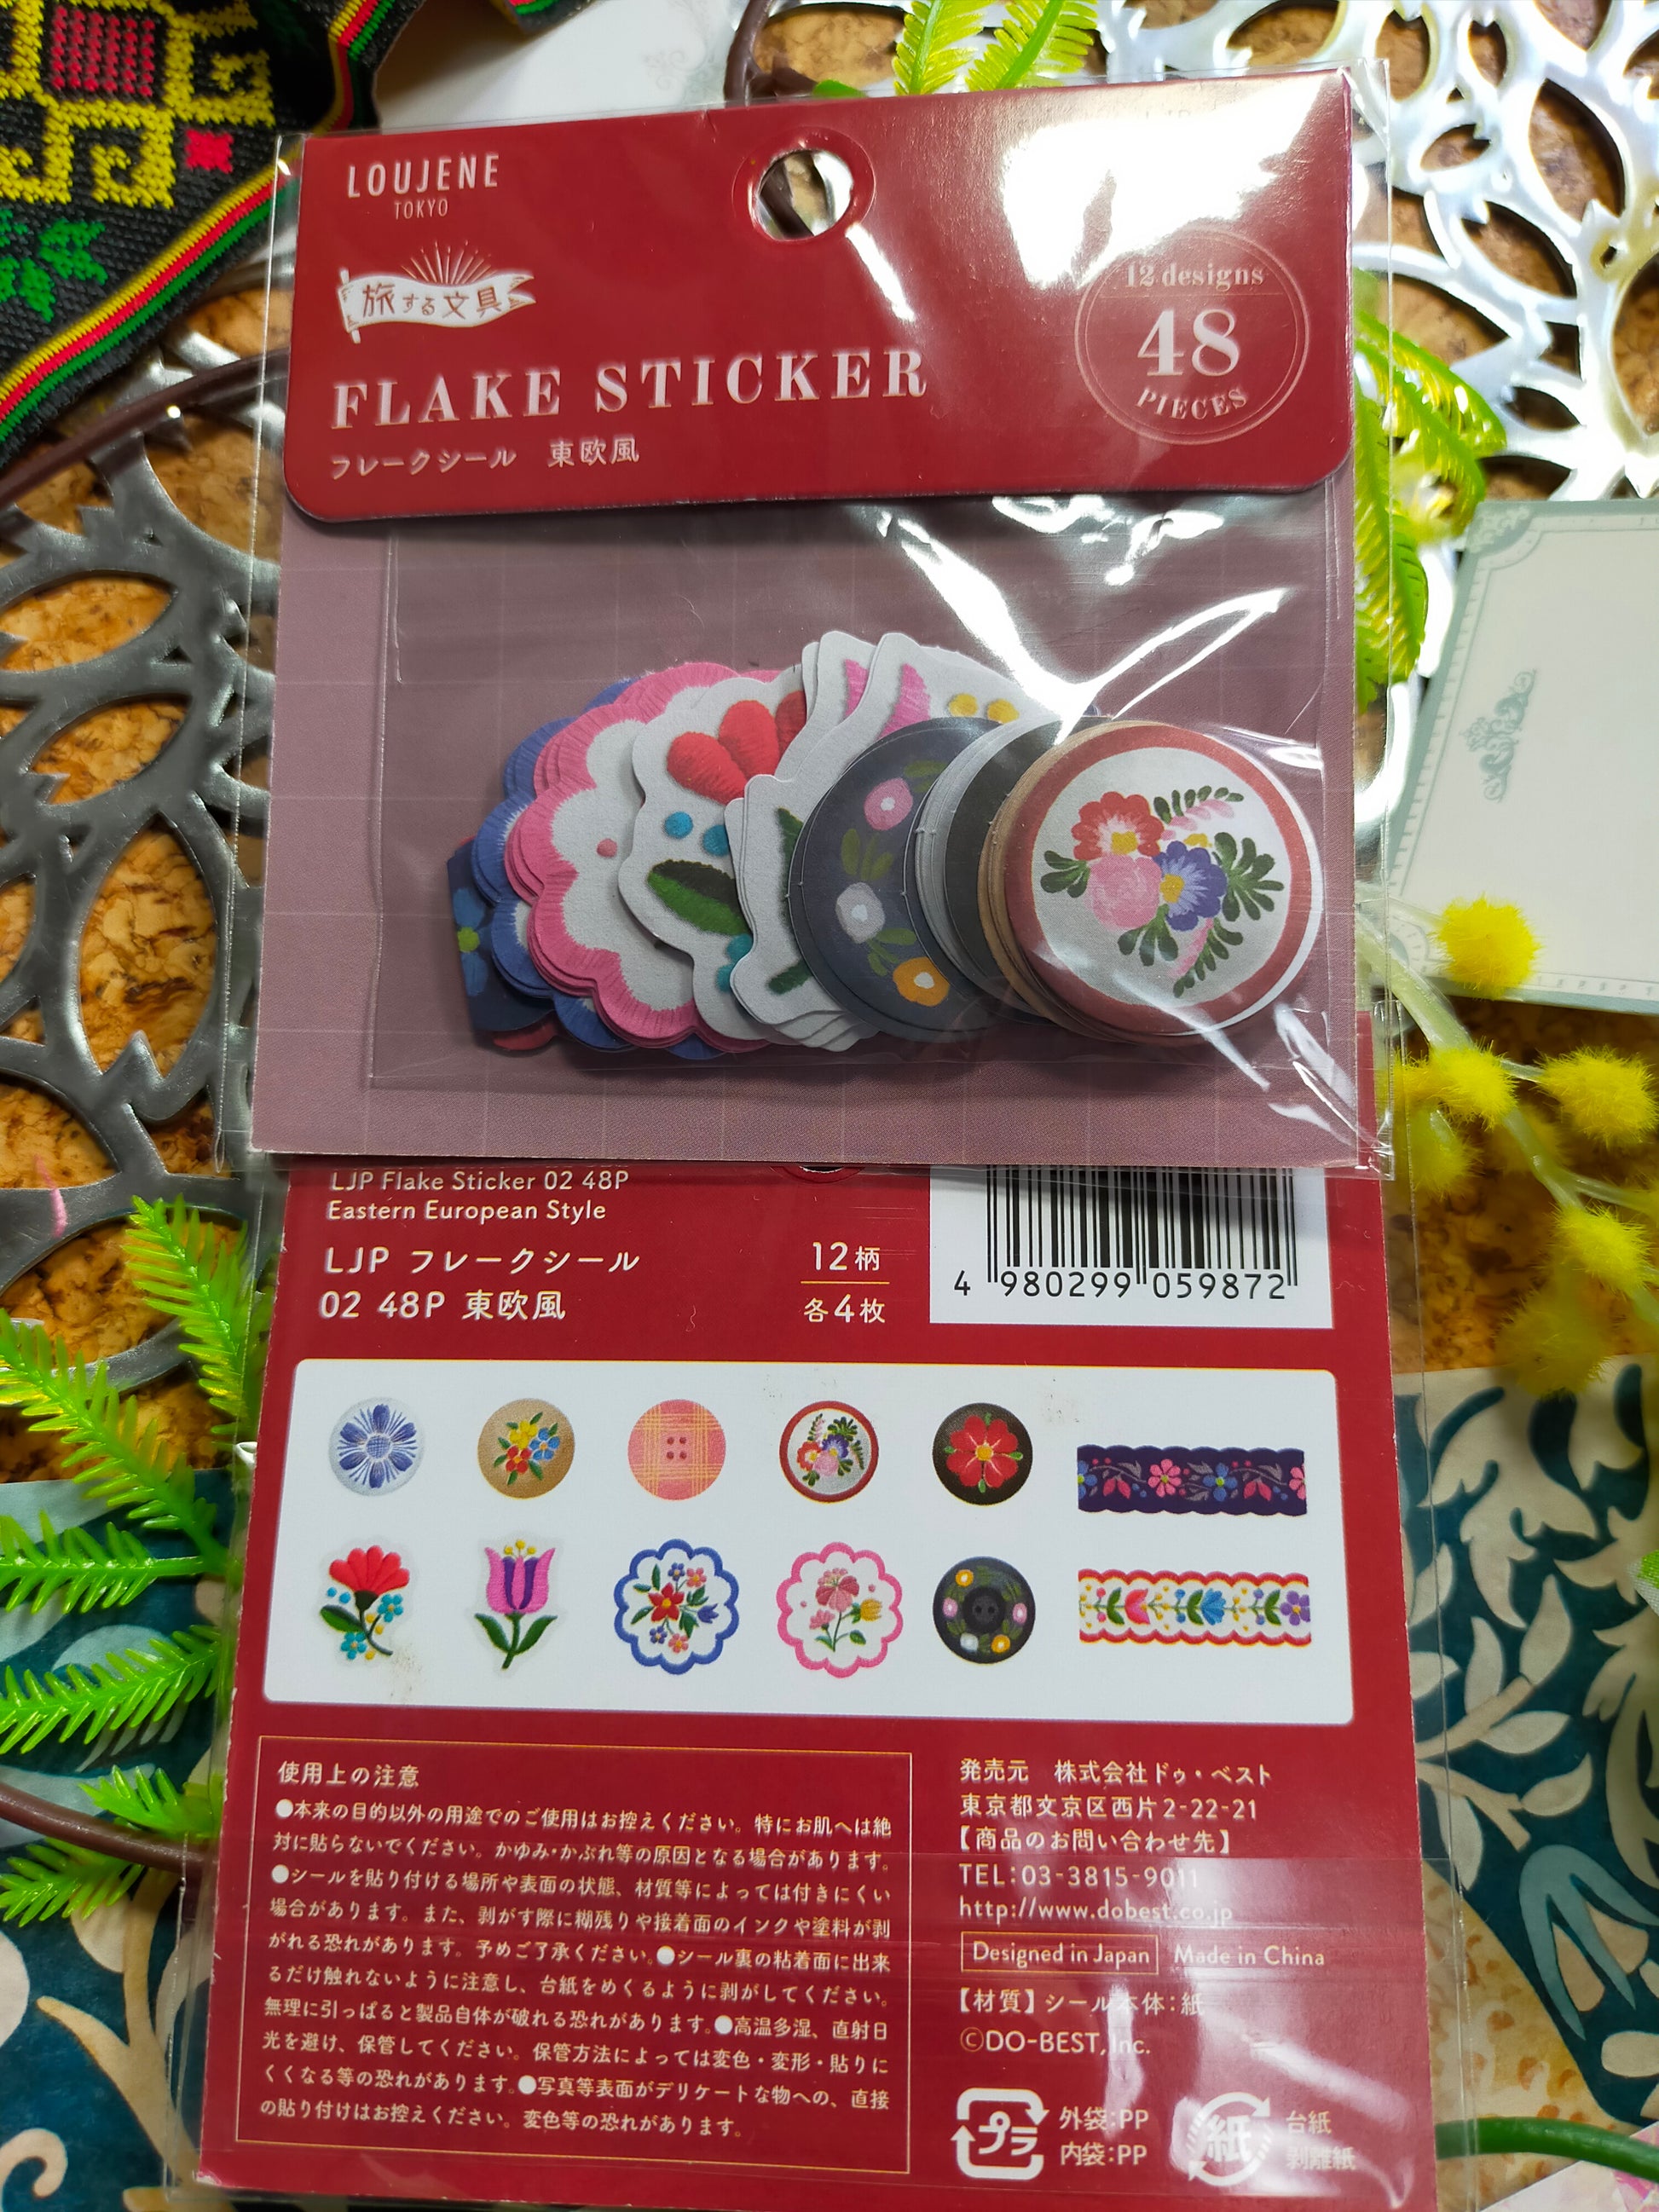 FLAKE STICKER Traveling Stationery Oriental Style 12designs*4pieces, LOUJENE_ Red / Blue